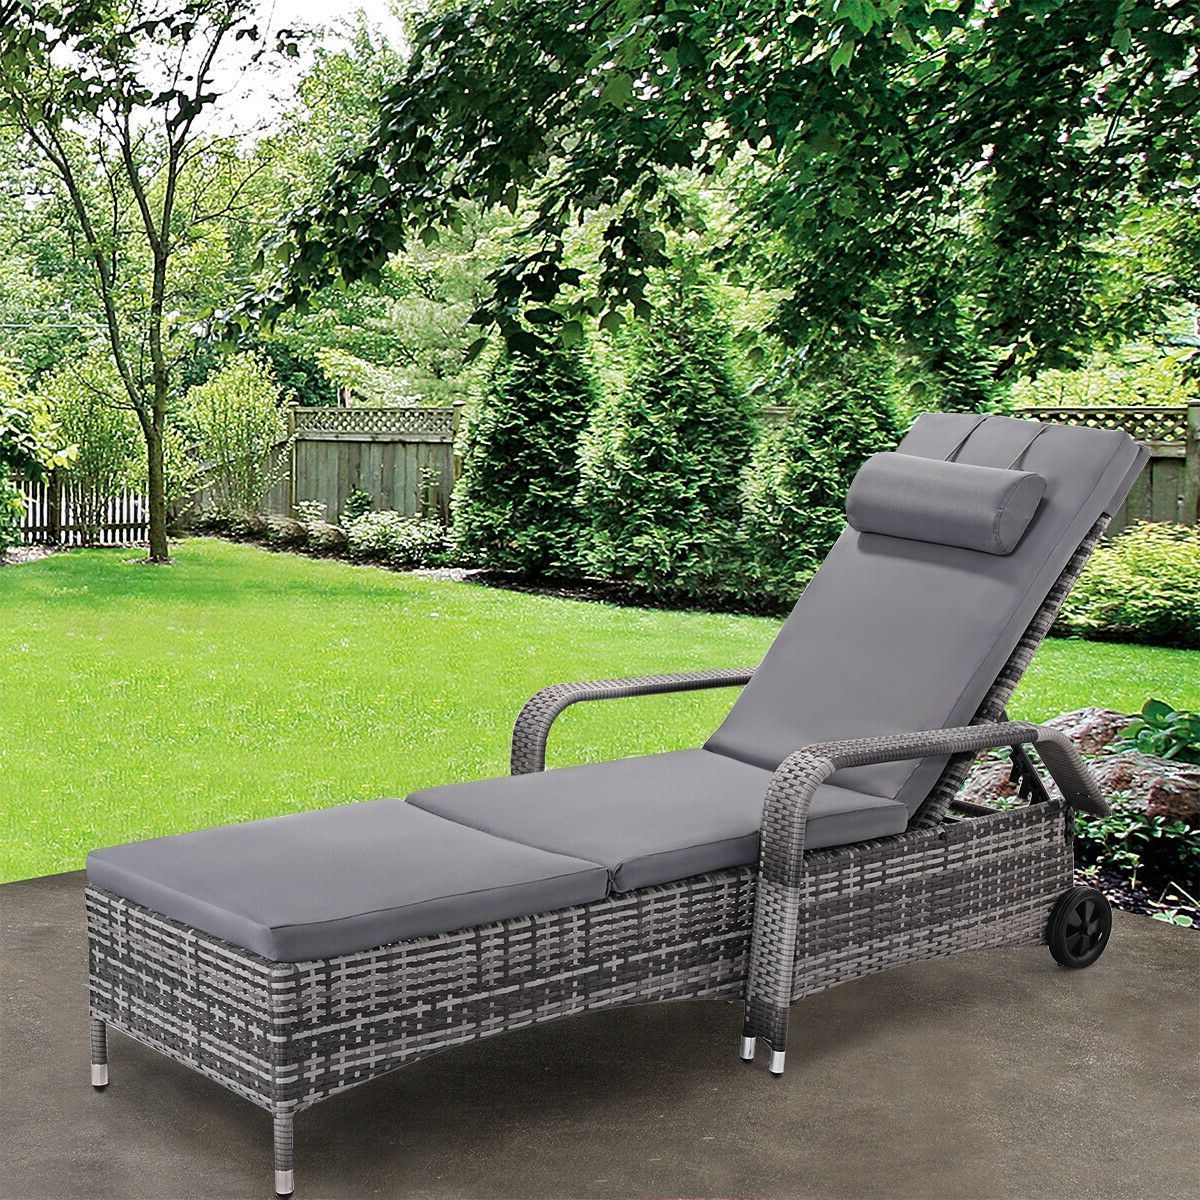 Most Popular Adjustable Outdoor Lounger Chairs Pertaining To Outdoor Rattan Adjustable Cushioned Lounge Chair In  (View 2 of 15)